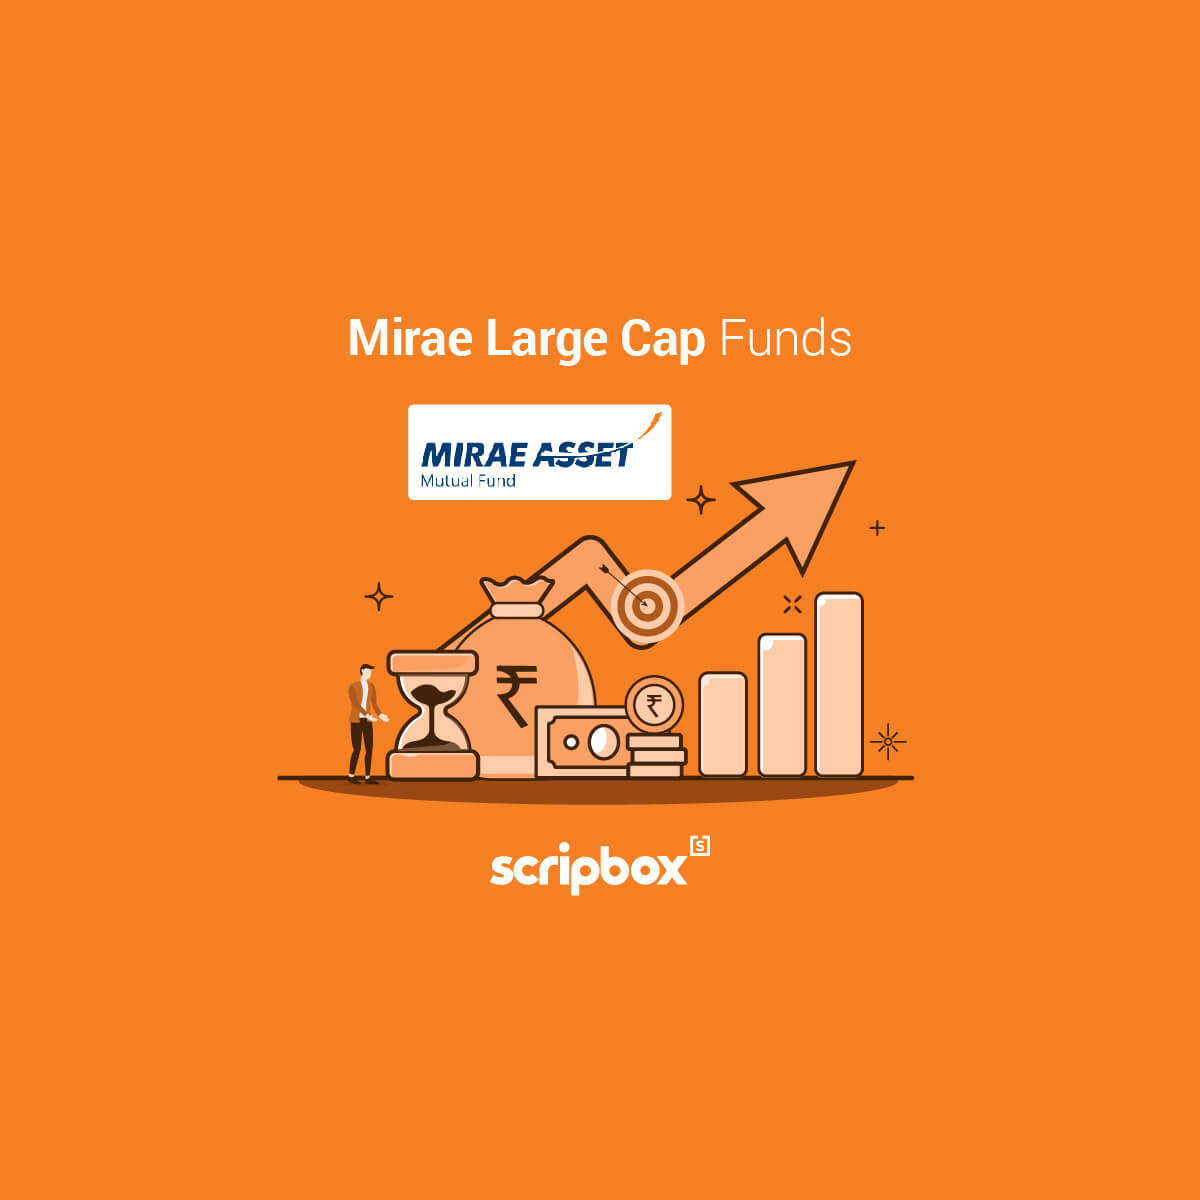 Mirae Asset Large Cap Fund (Growth) Mutual Fund Investment in 2020